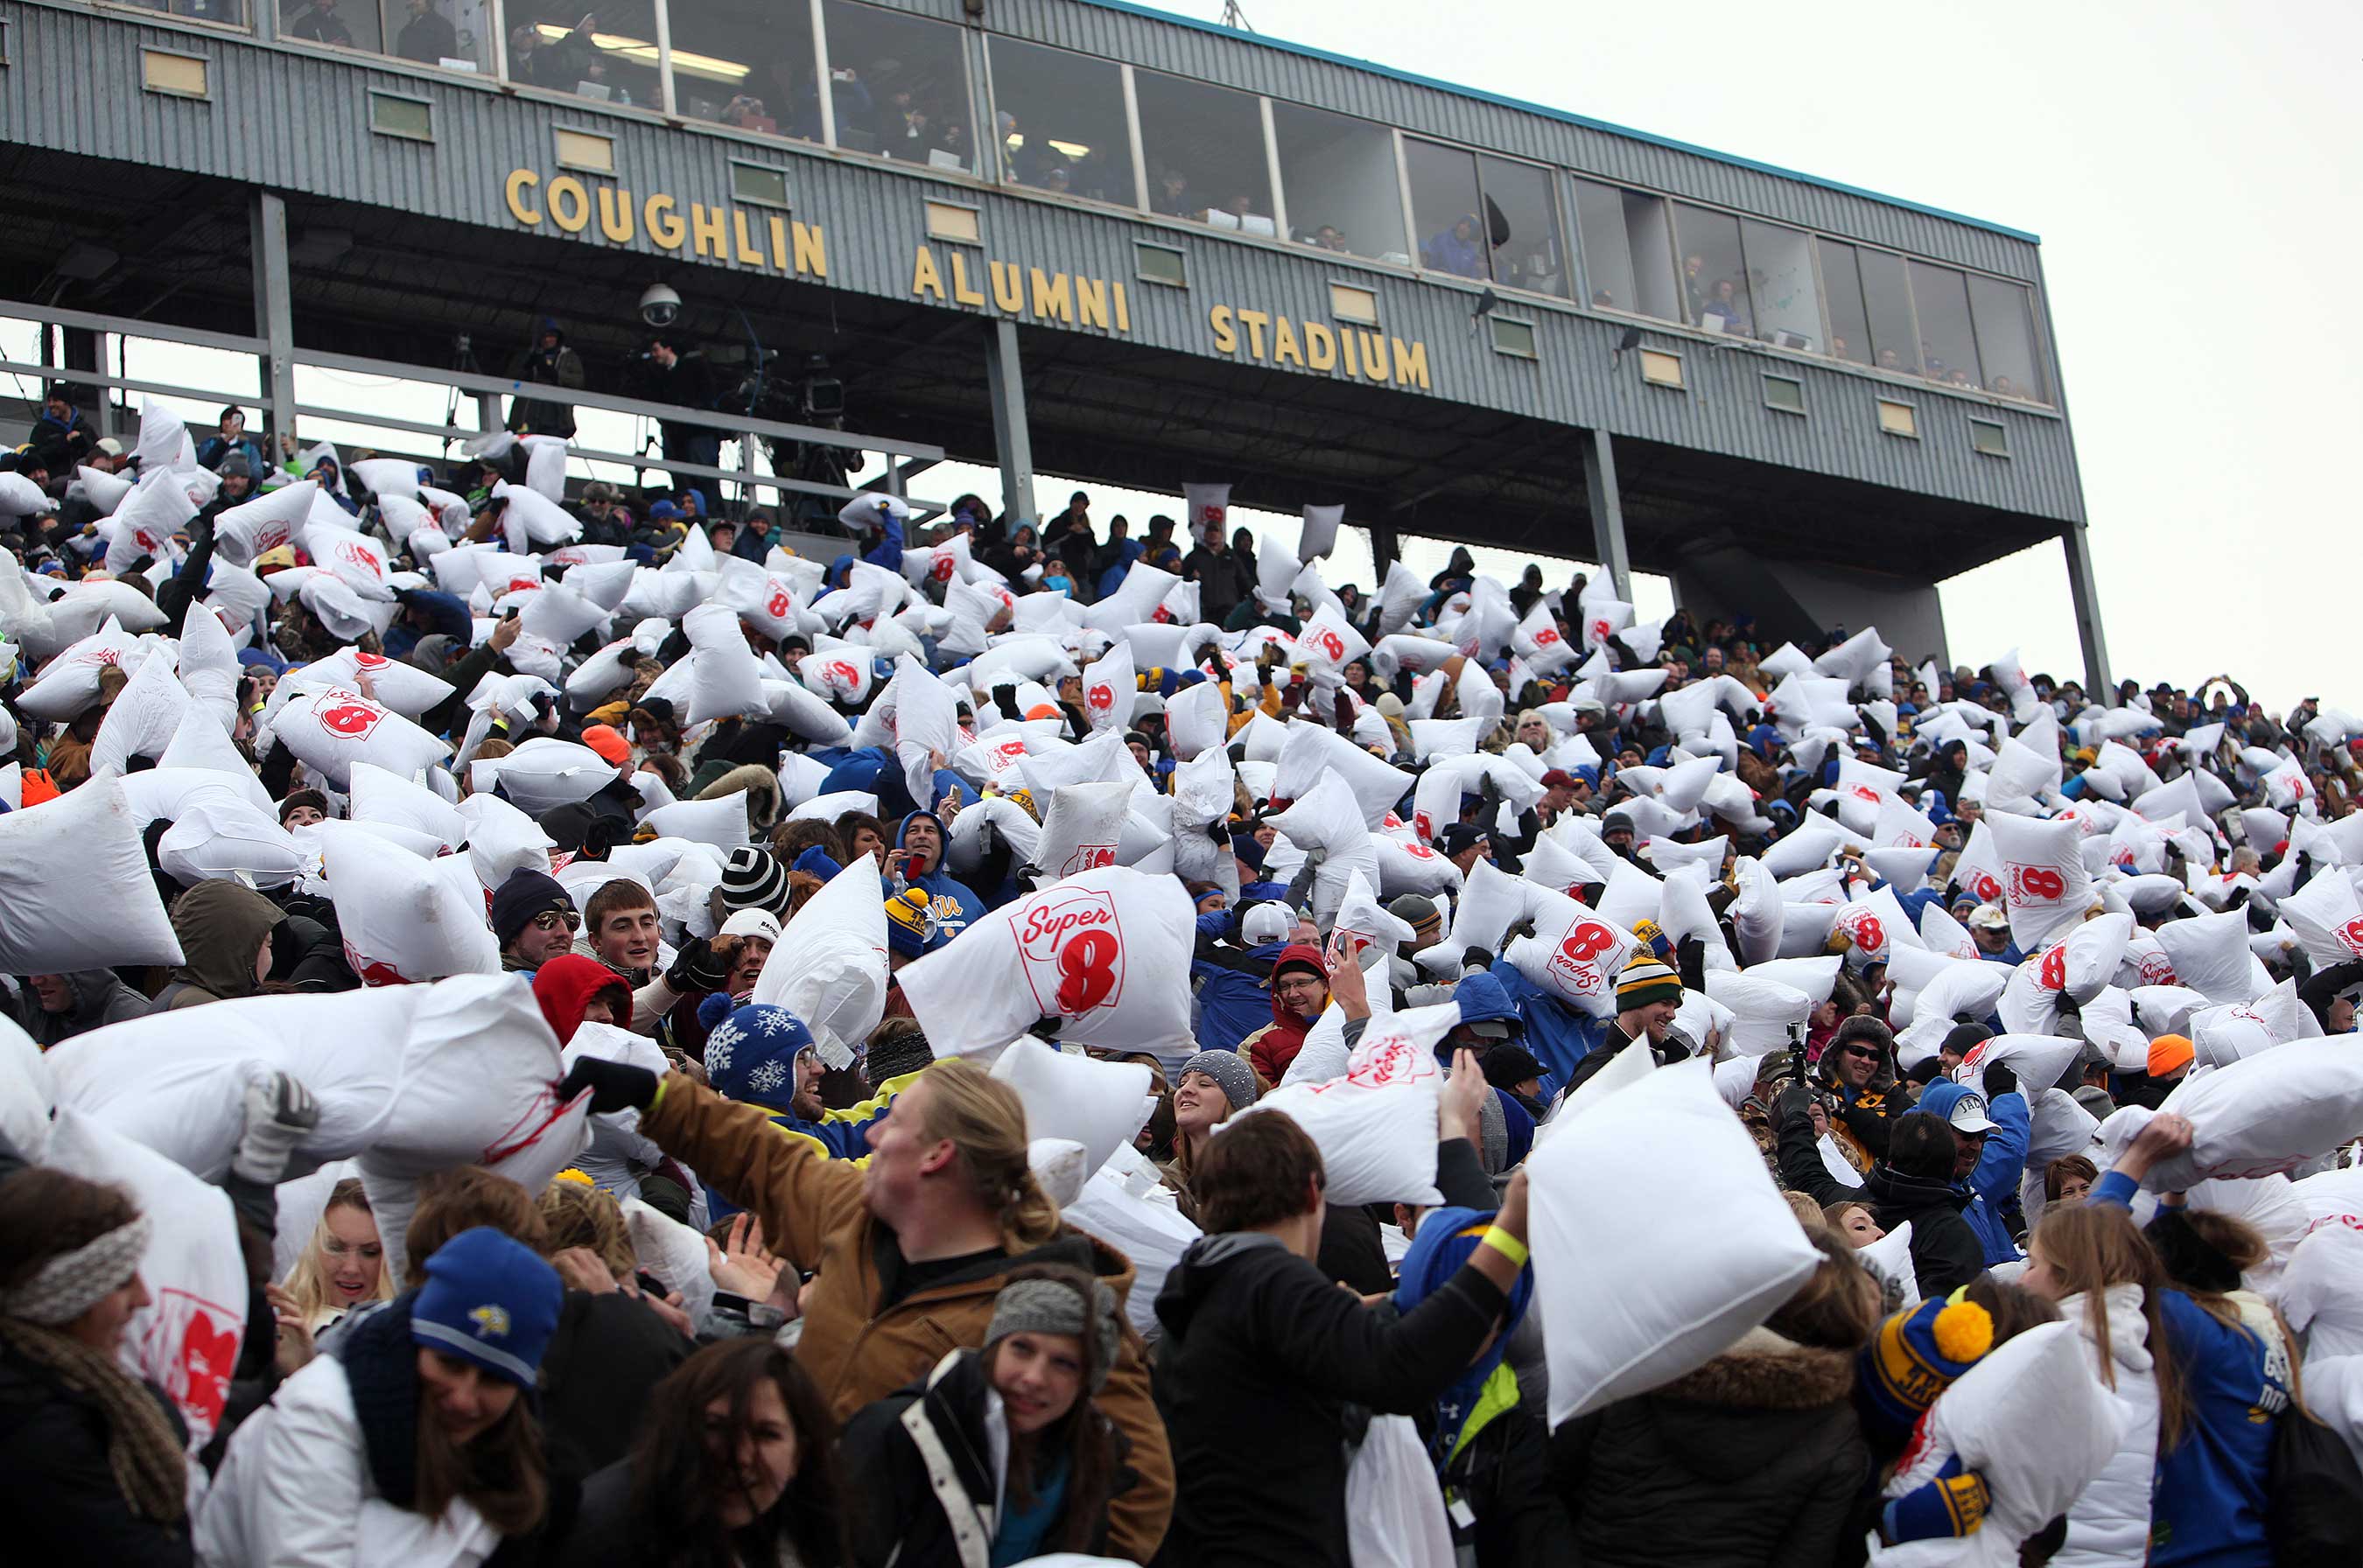 Super 8 Hotels breaks the Guinness World Record for the largest pillow fight at South Dakota State University. The 40th anniversary event featured TV host and former NSYNC pop star, Joey Fatone. (Photo by Jay Pickthorn/Invision for Super 8) 